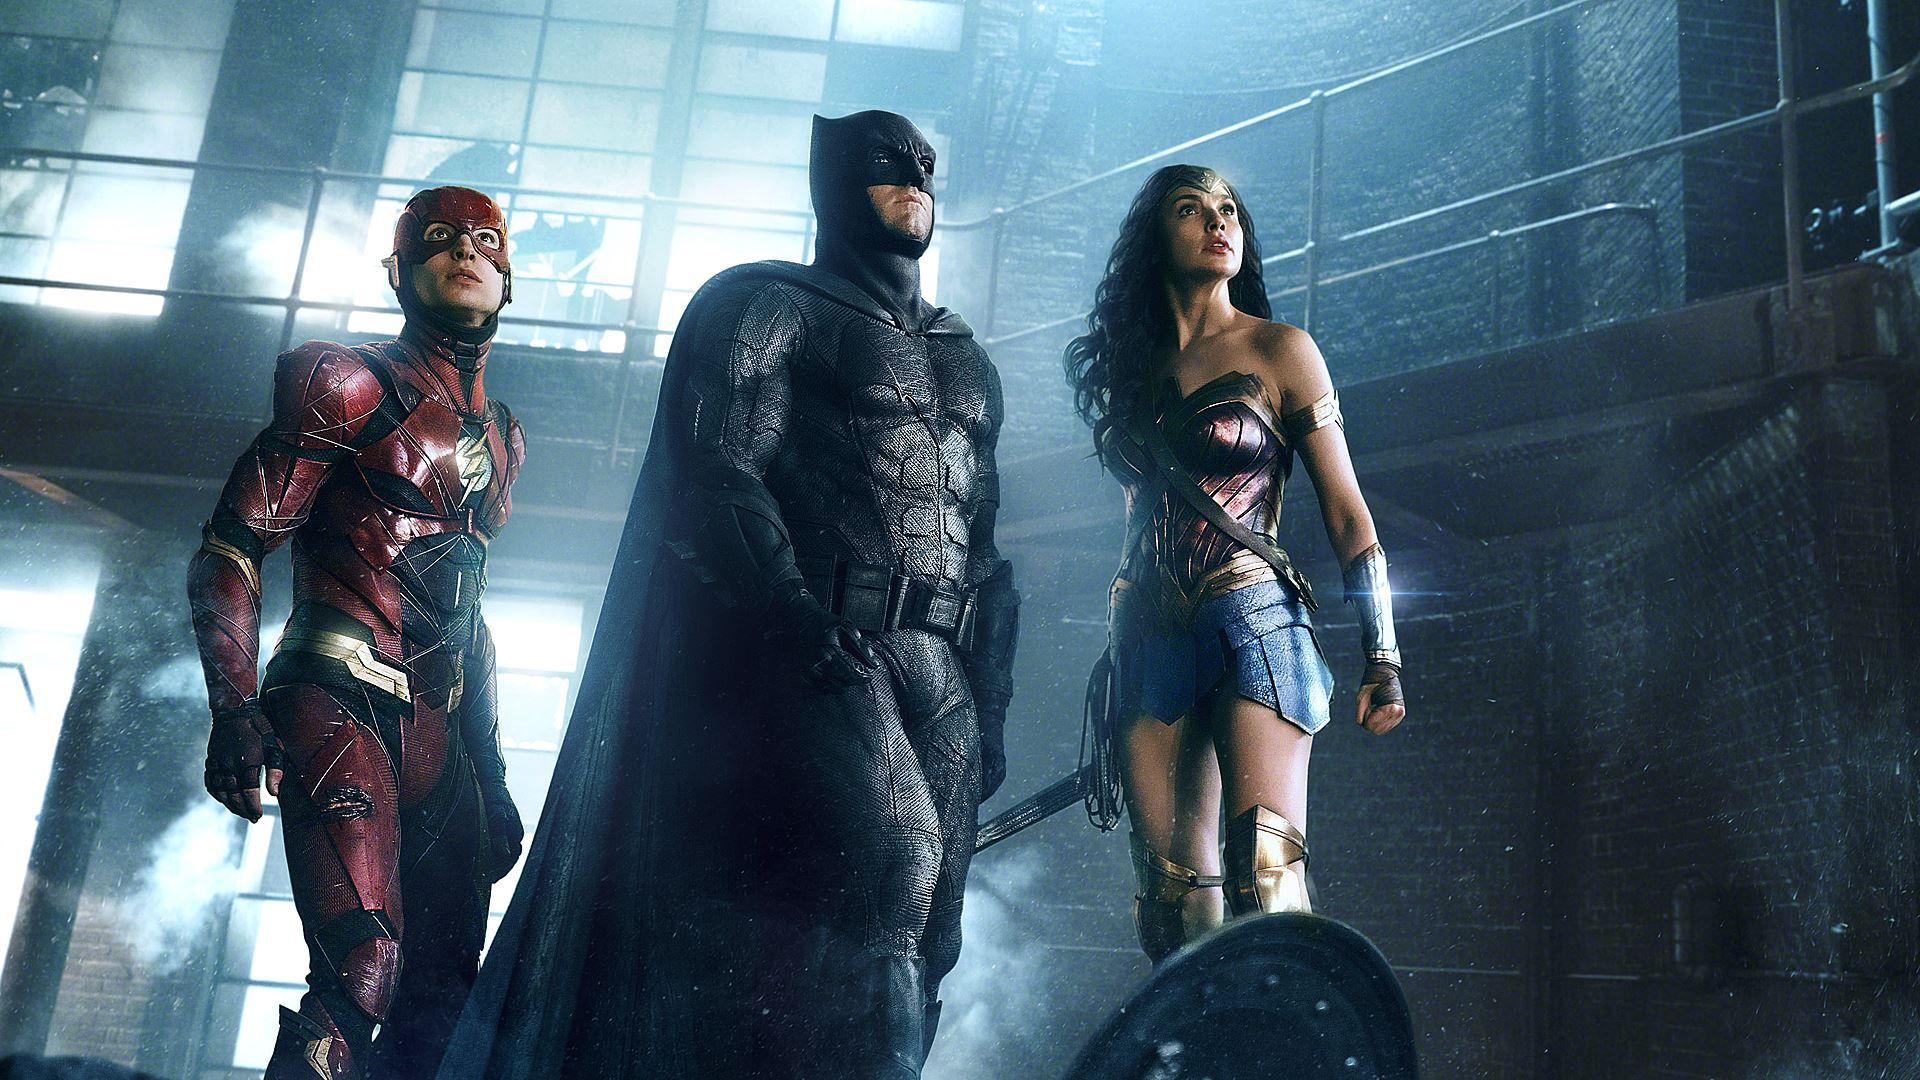 How to watch DC movies in order (release date and chronological)